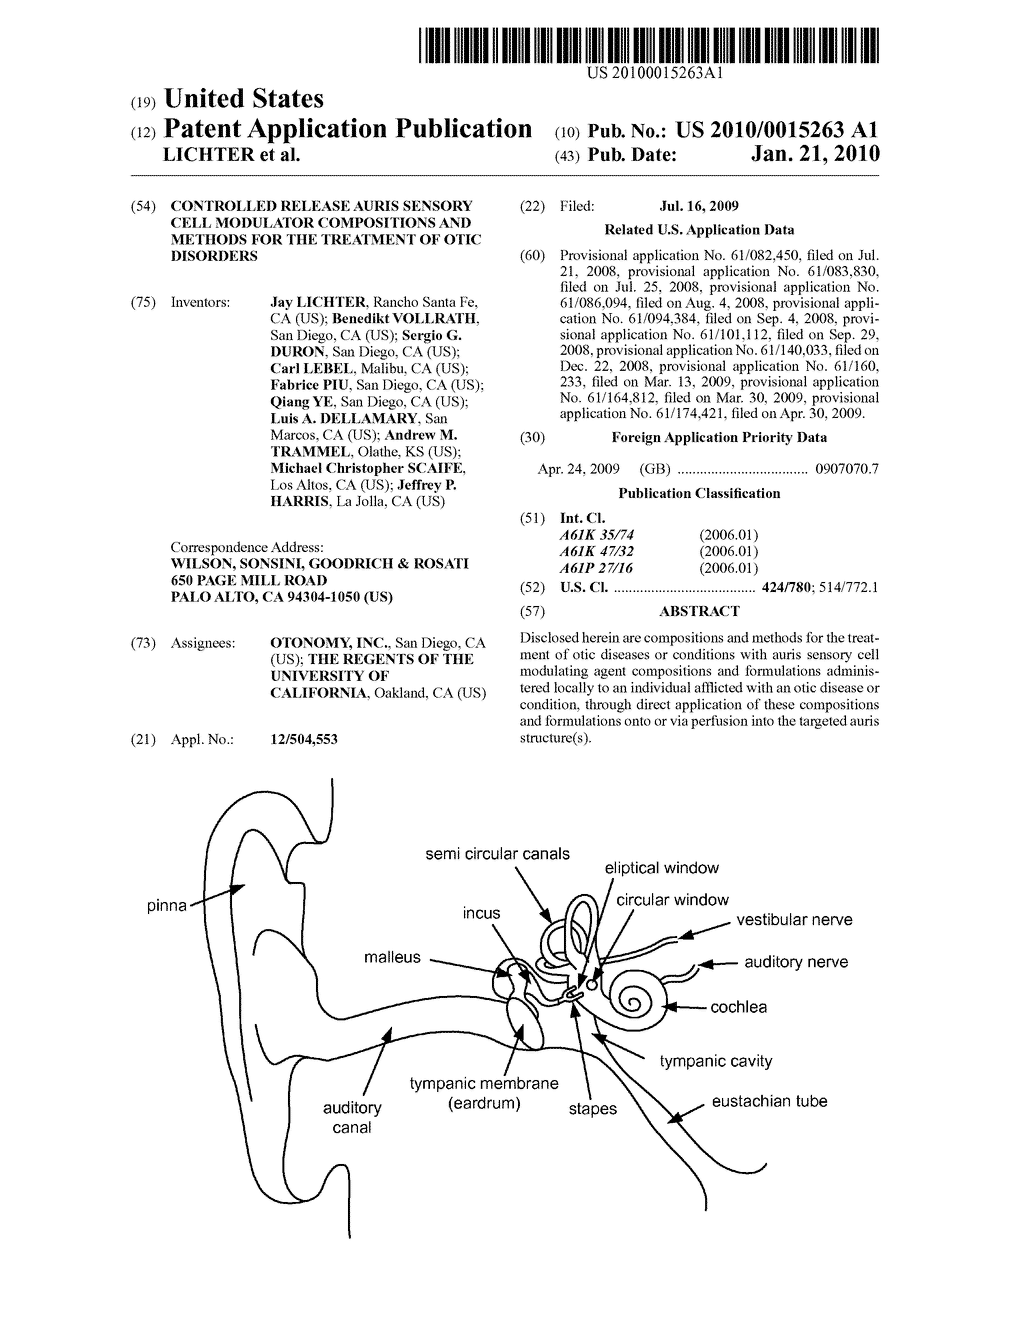 CONTROLLED RELEASE AURIS SENSORY CELL MODULATOR COMPOSITIONS AND METHODS FOR THE TREATMENT OF OTIC DISORDERS - diagram, schematic, and image 01